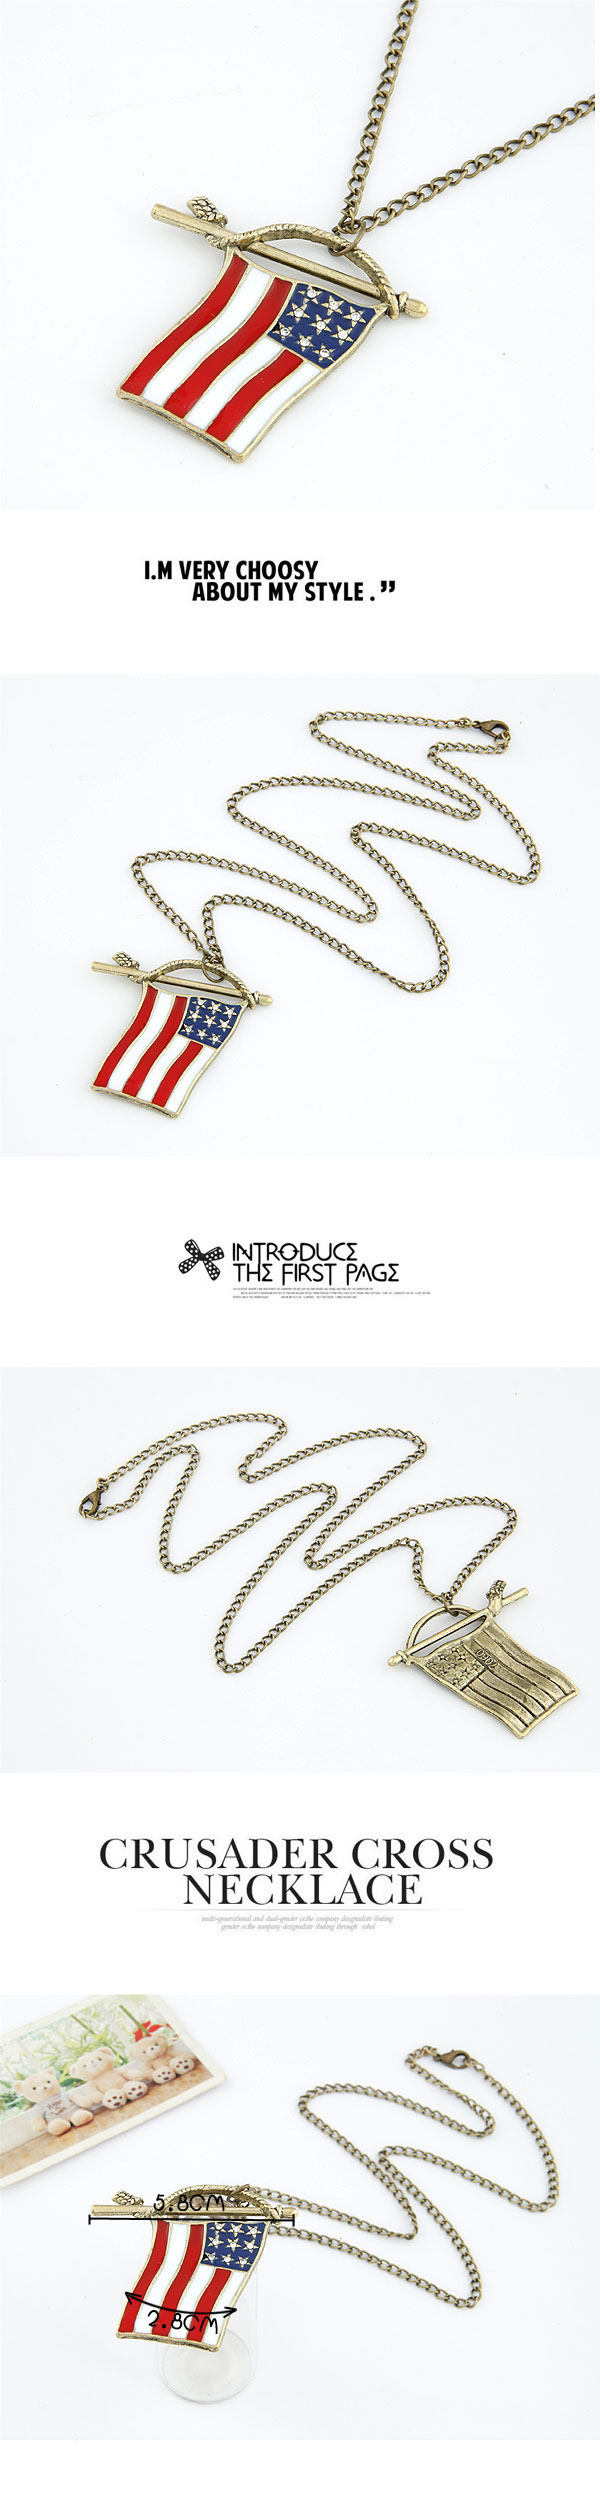 24K Red Flag Shape Design Alloy Chains,Chains